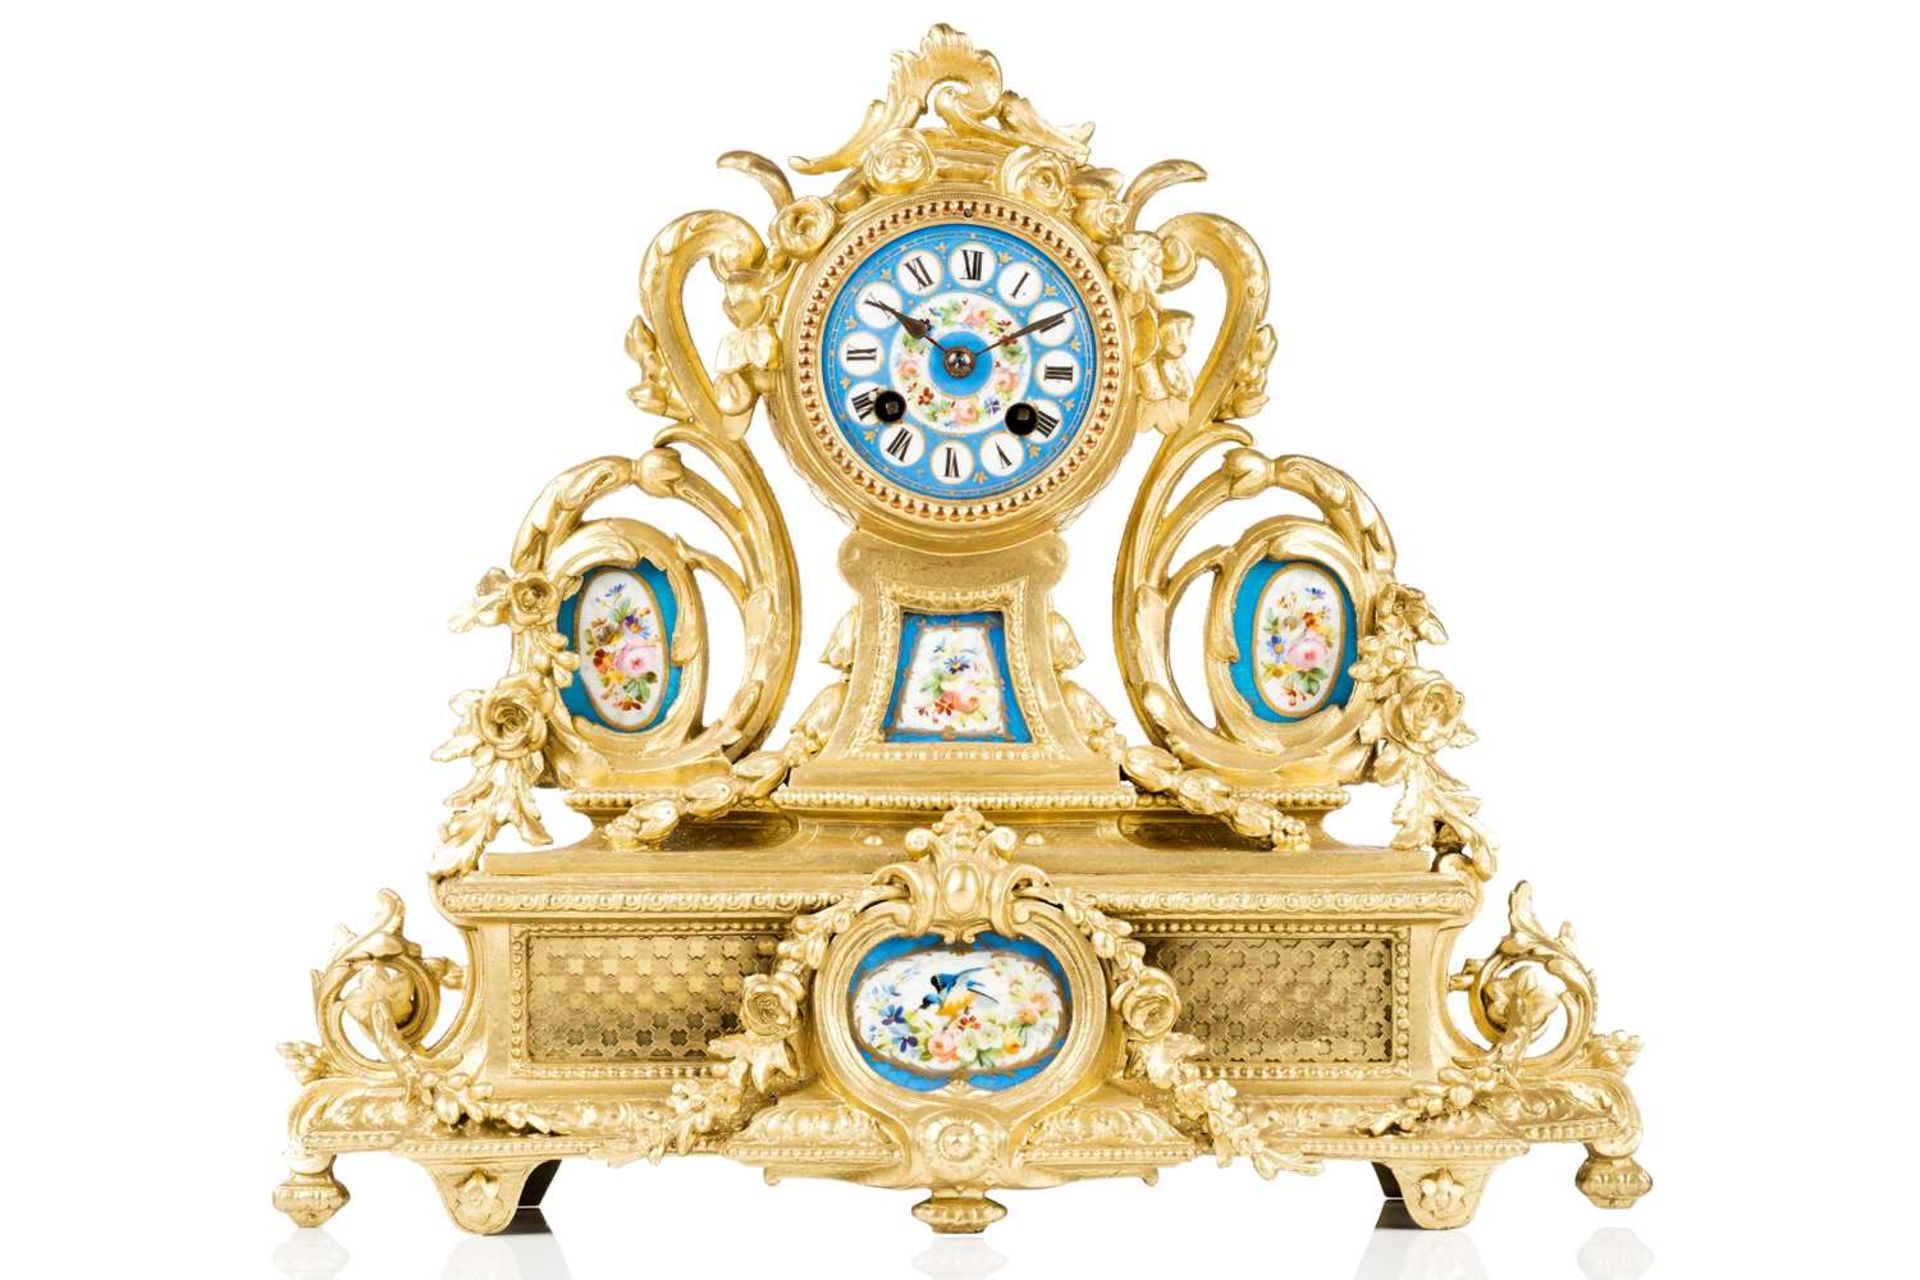 A Louis XVI-style 8-day gilt metal mantle clock, late 19th century, the architectural case set